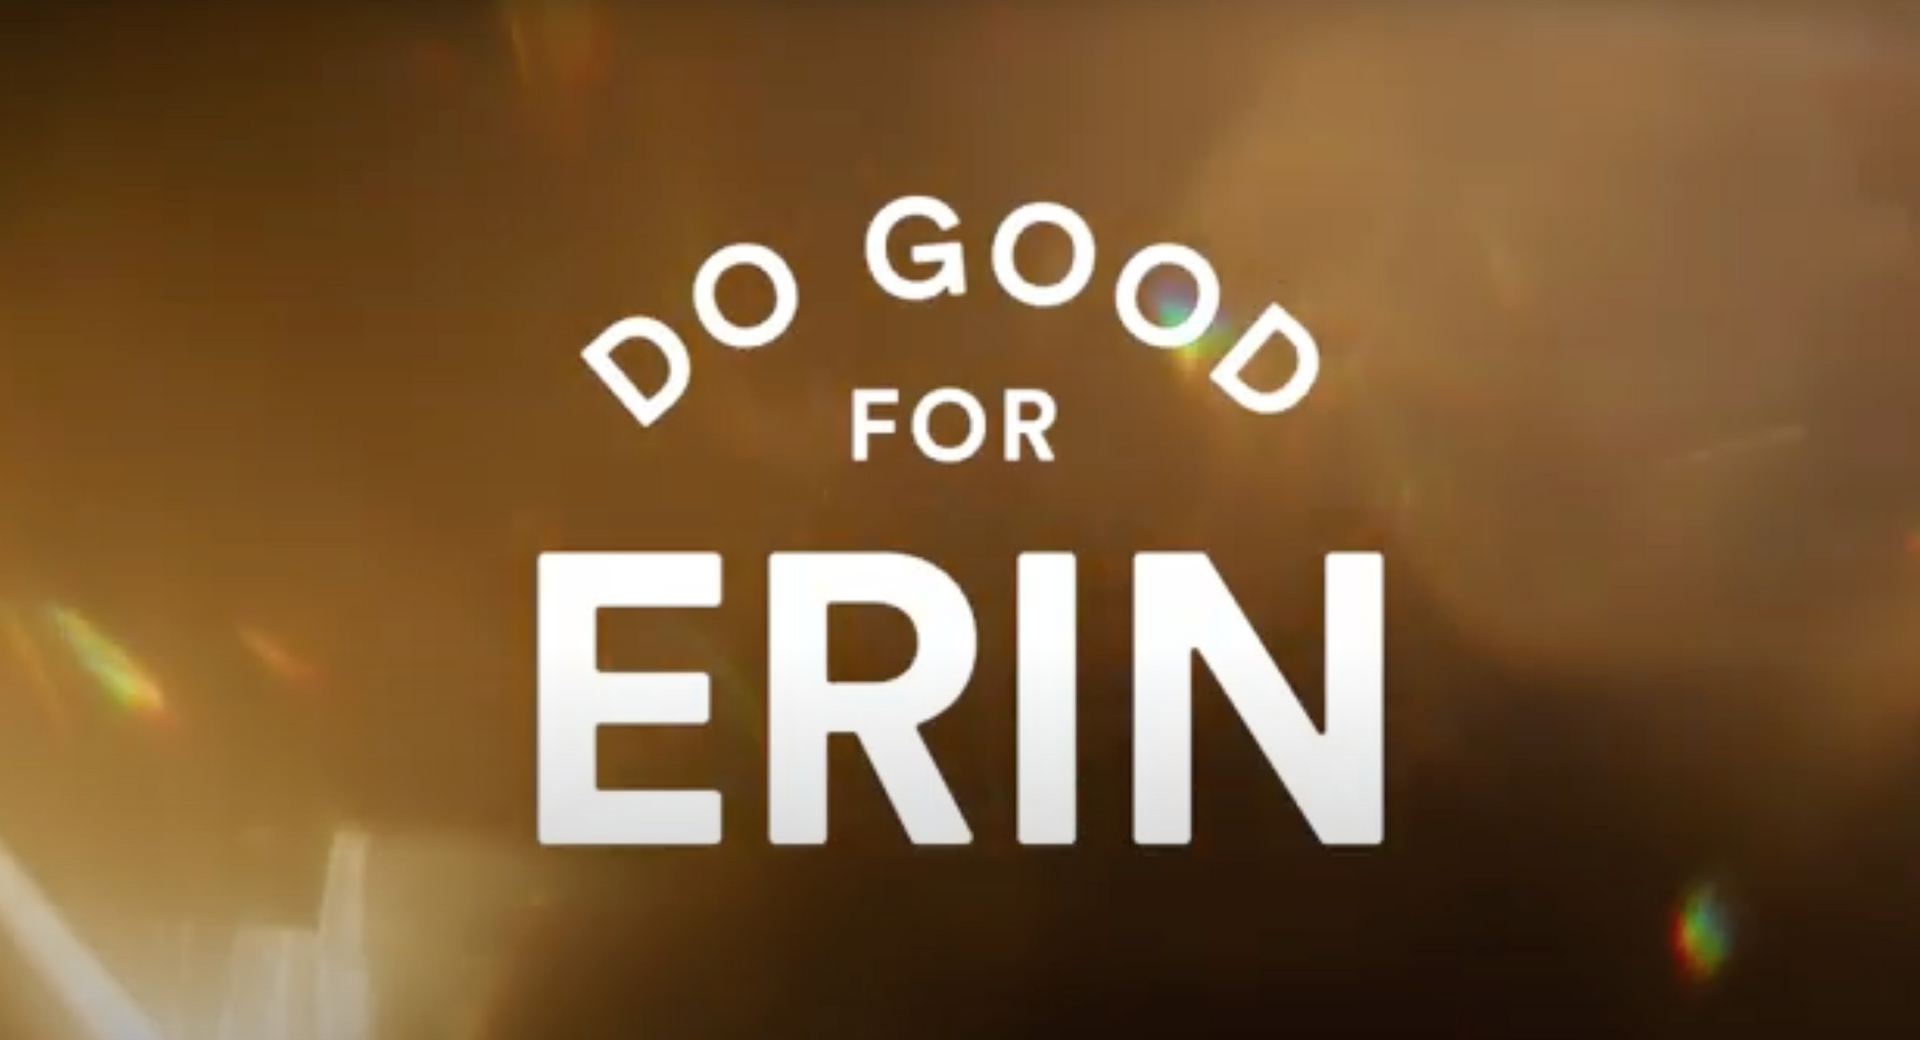 Load video: Leaders of Friends of Yates tell the story of the organization and how it fits with Do Good for Erin&#39;s purpose.